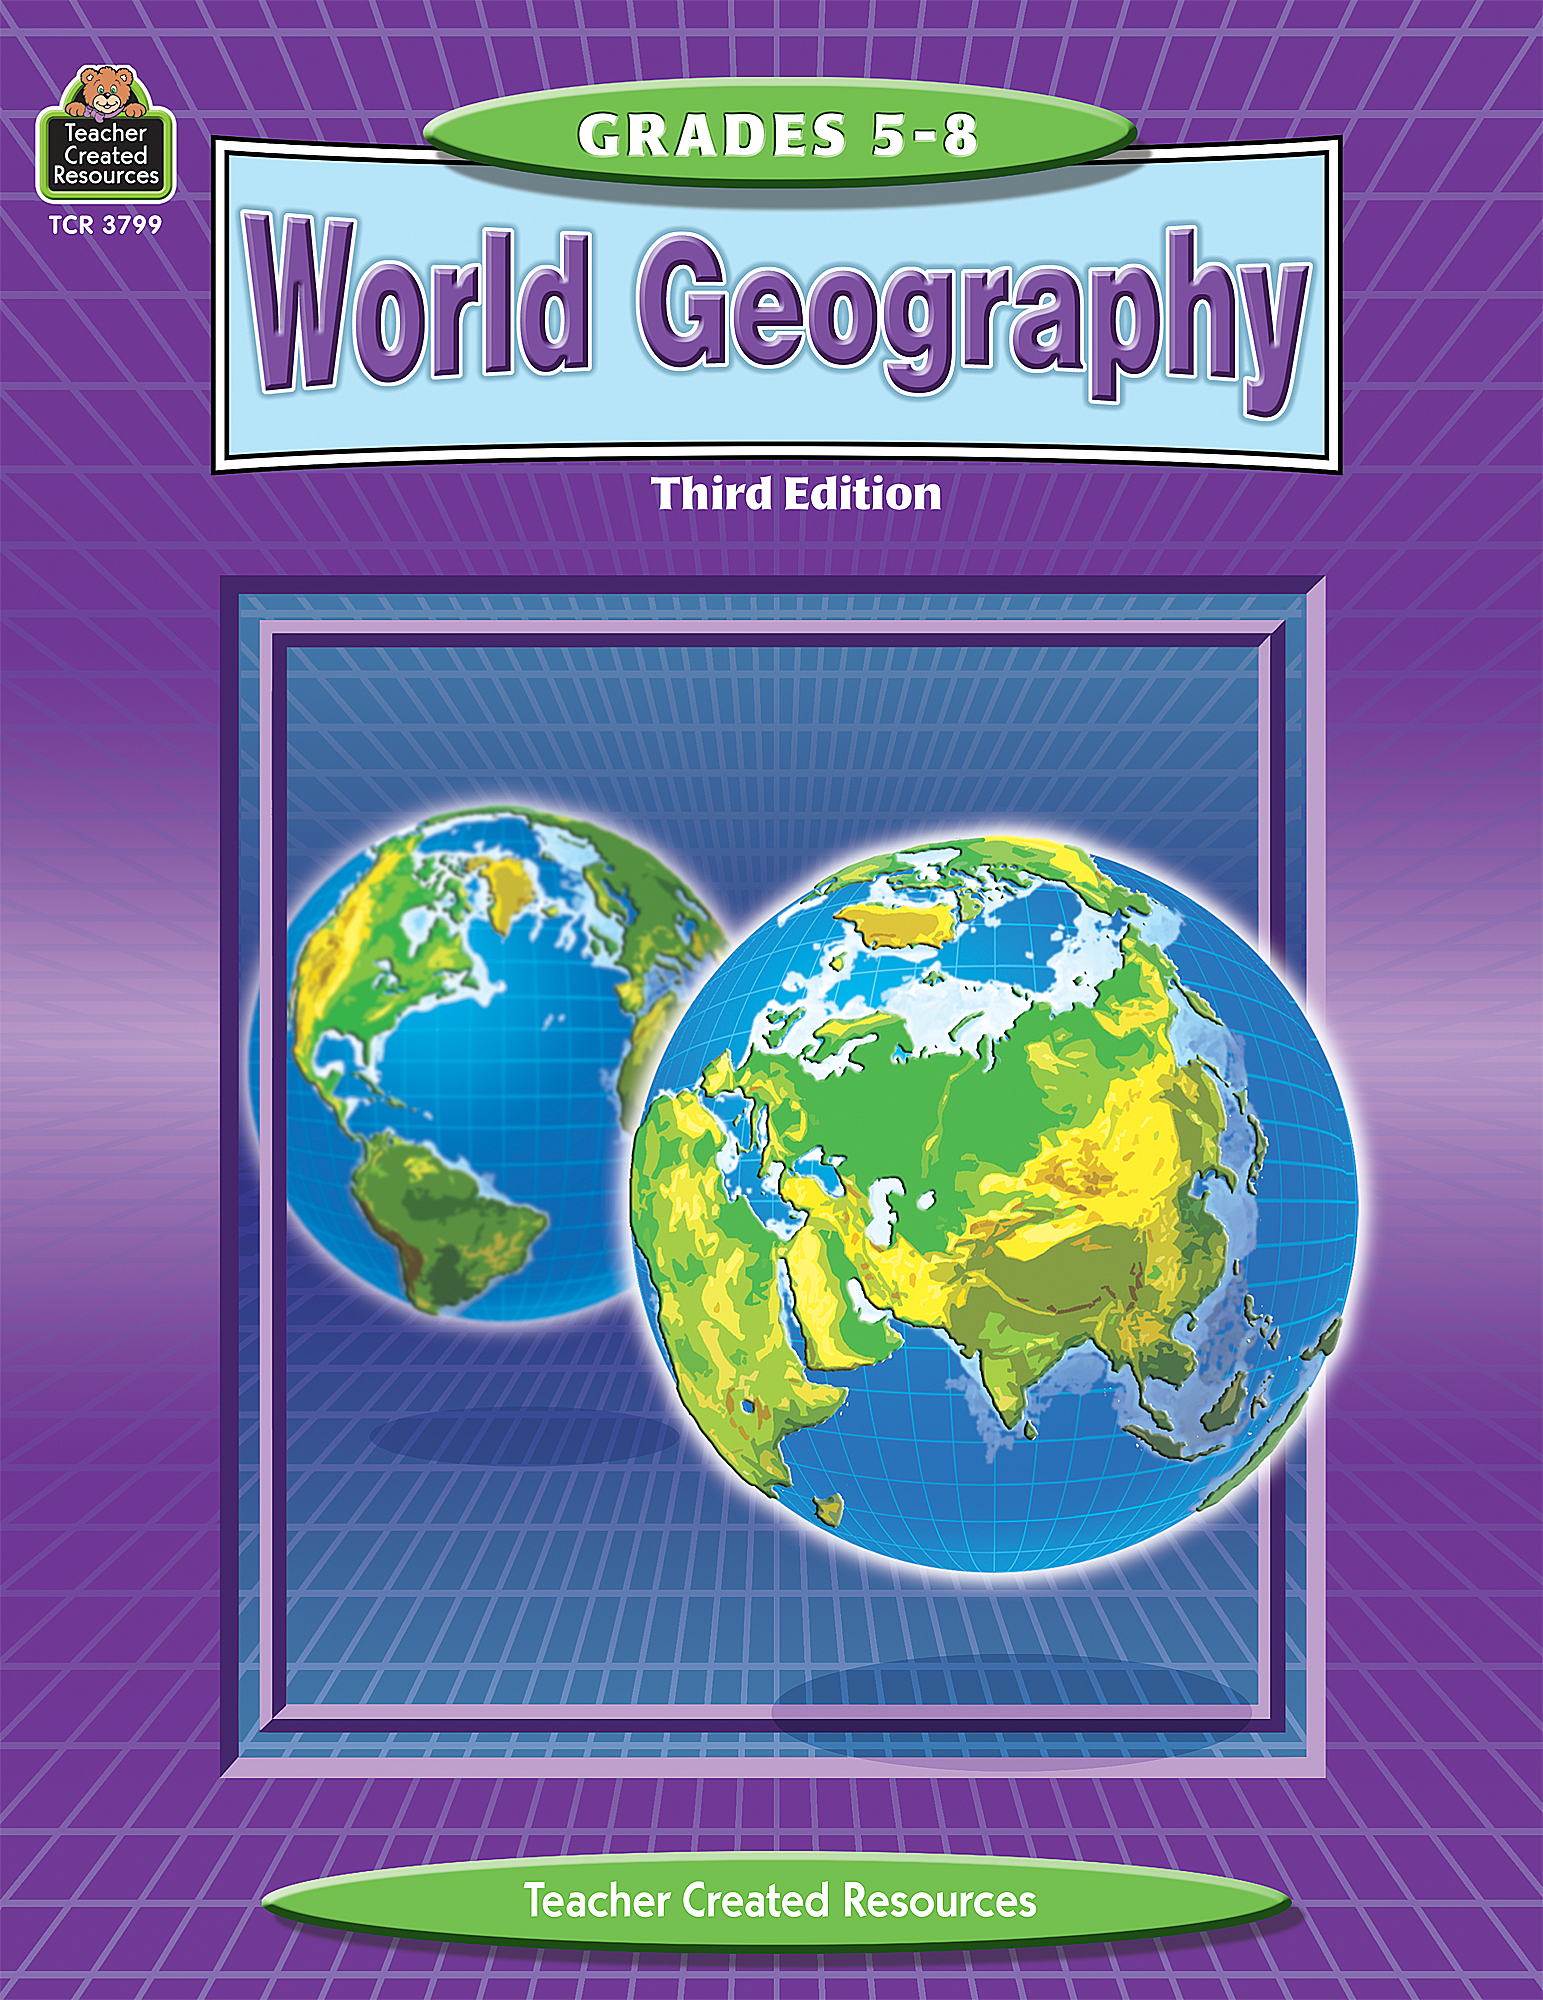 World Geography - TCR3799 | Teacher Created Resources